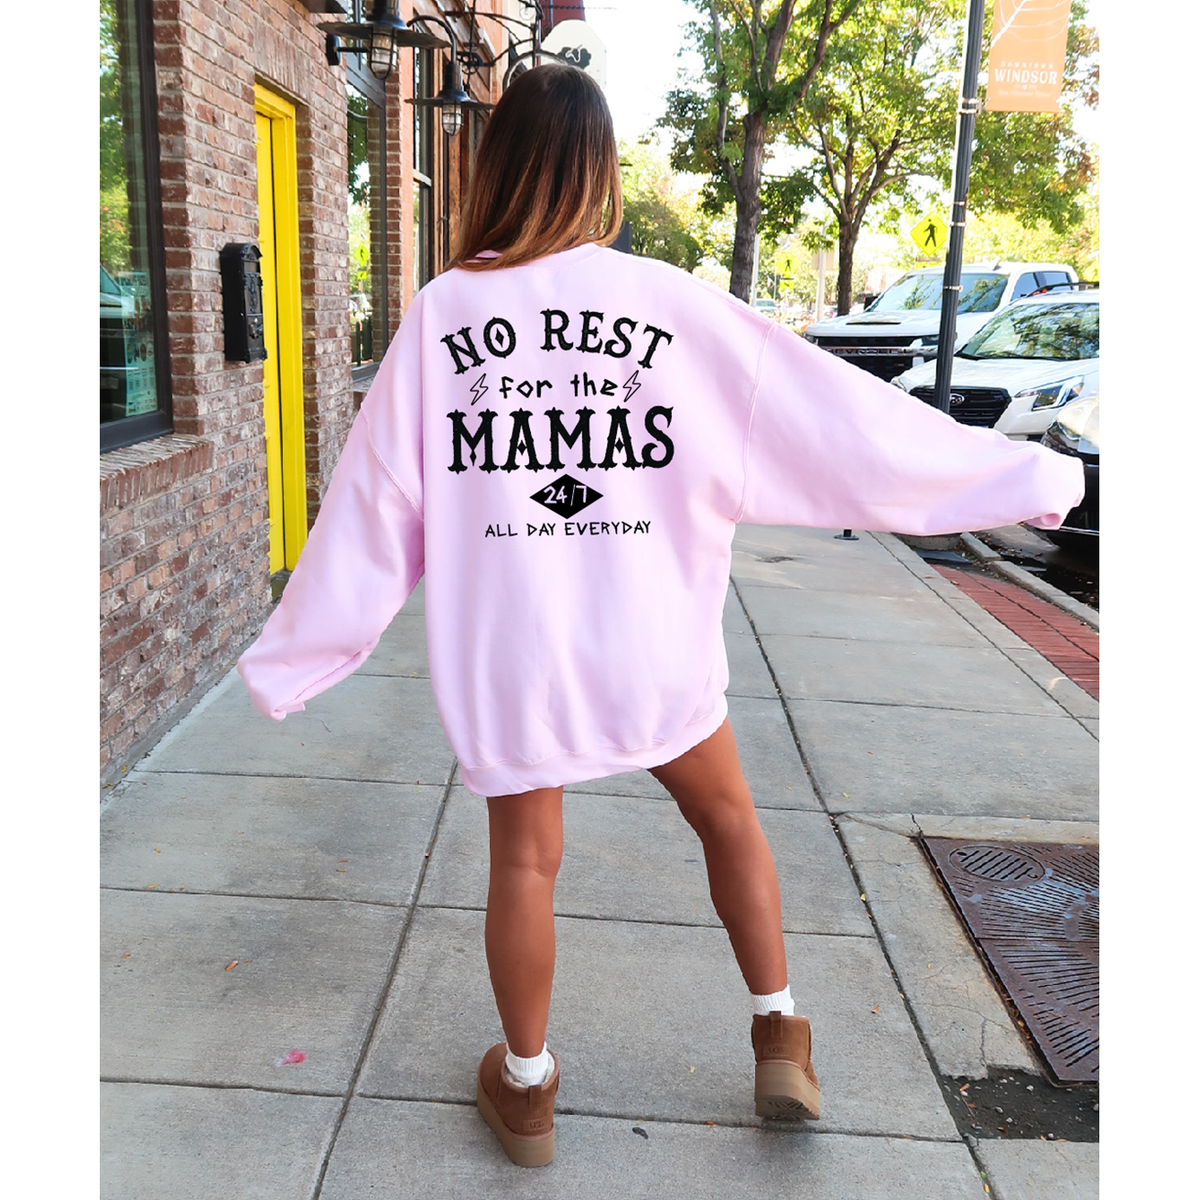 No rest for the Mamas Tee or Sweatshirt